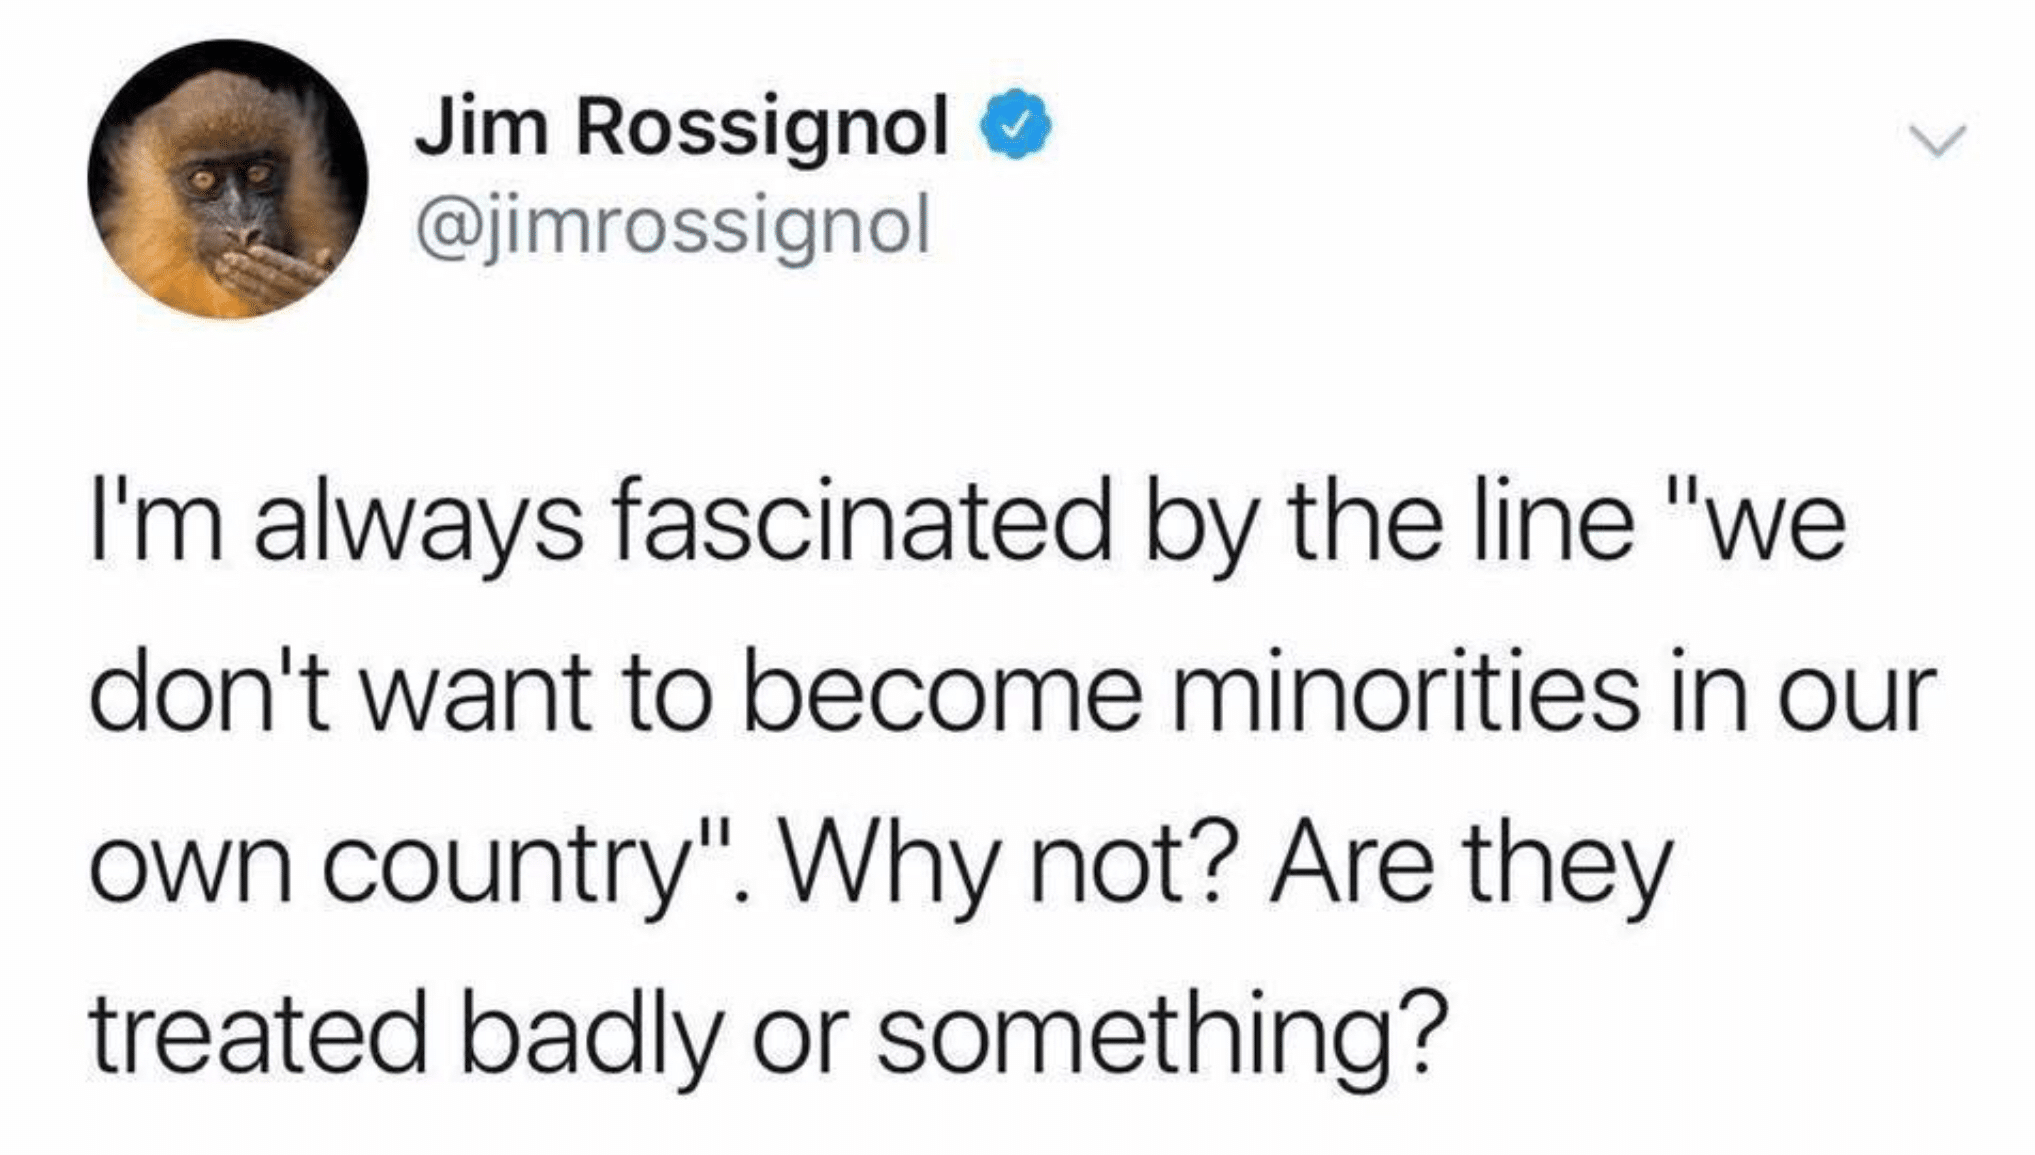 political political-memes political text: Jim Rossignol e @jimrossignol 11m always fascinated by the line 